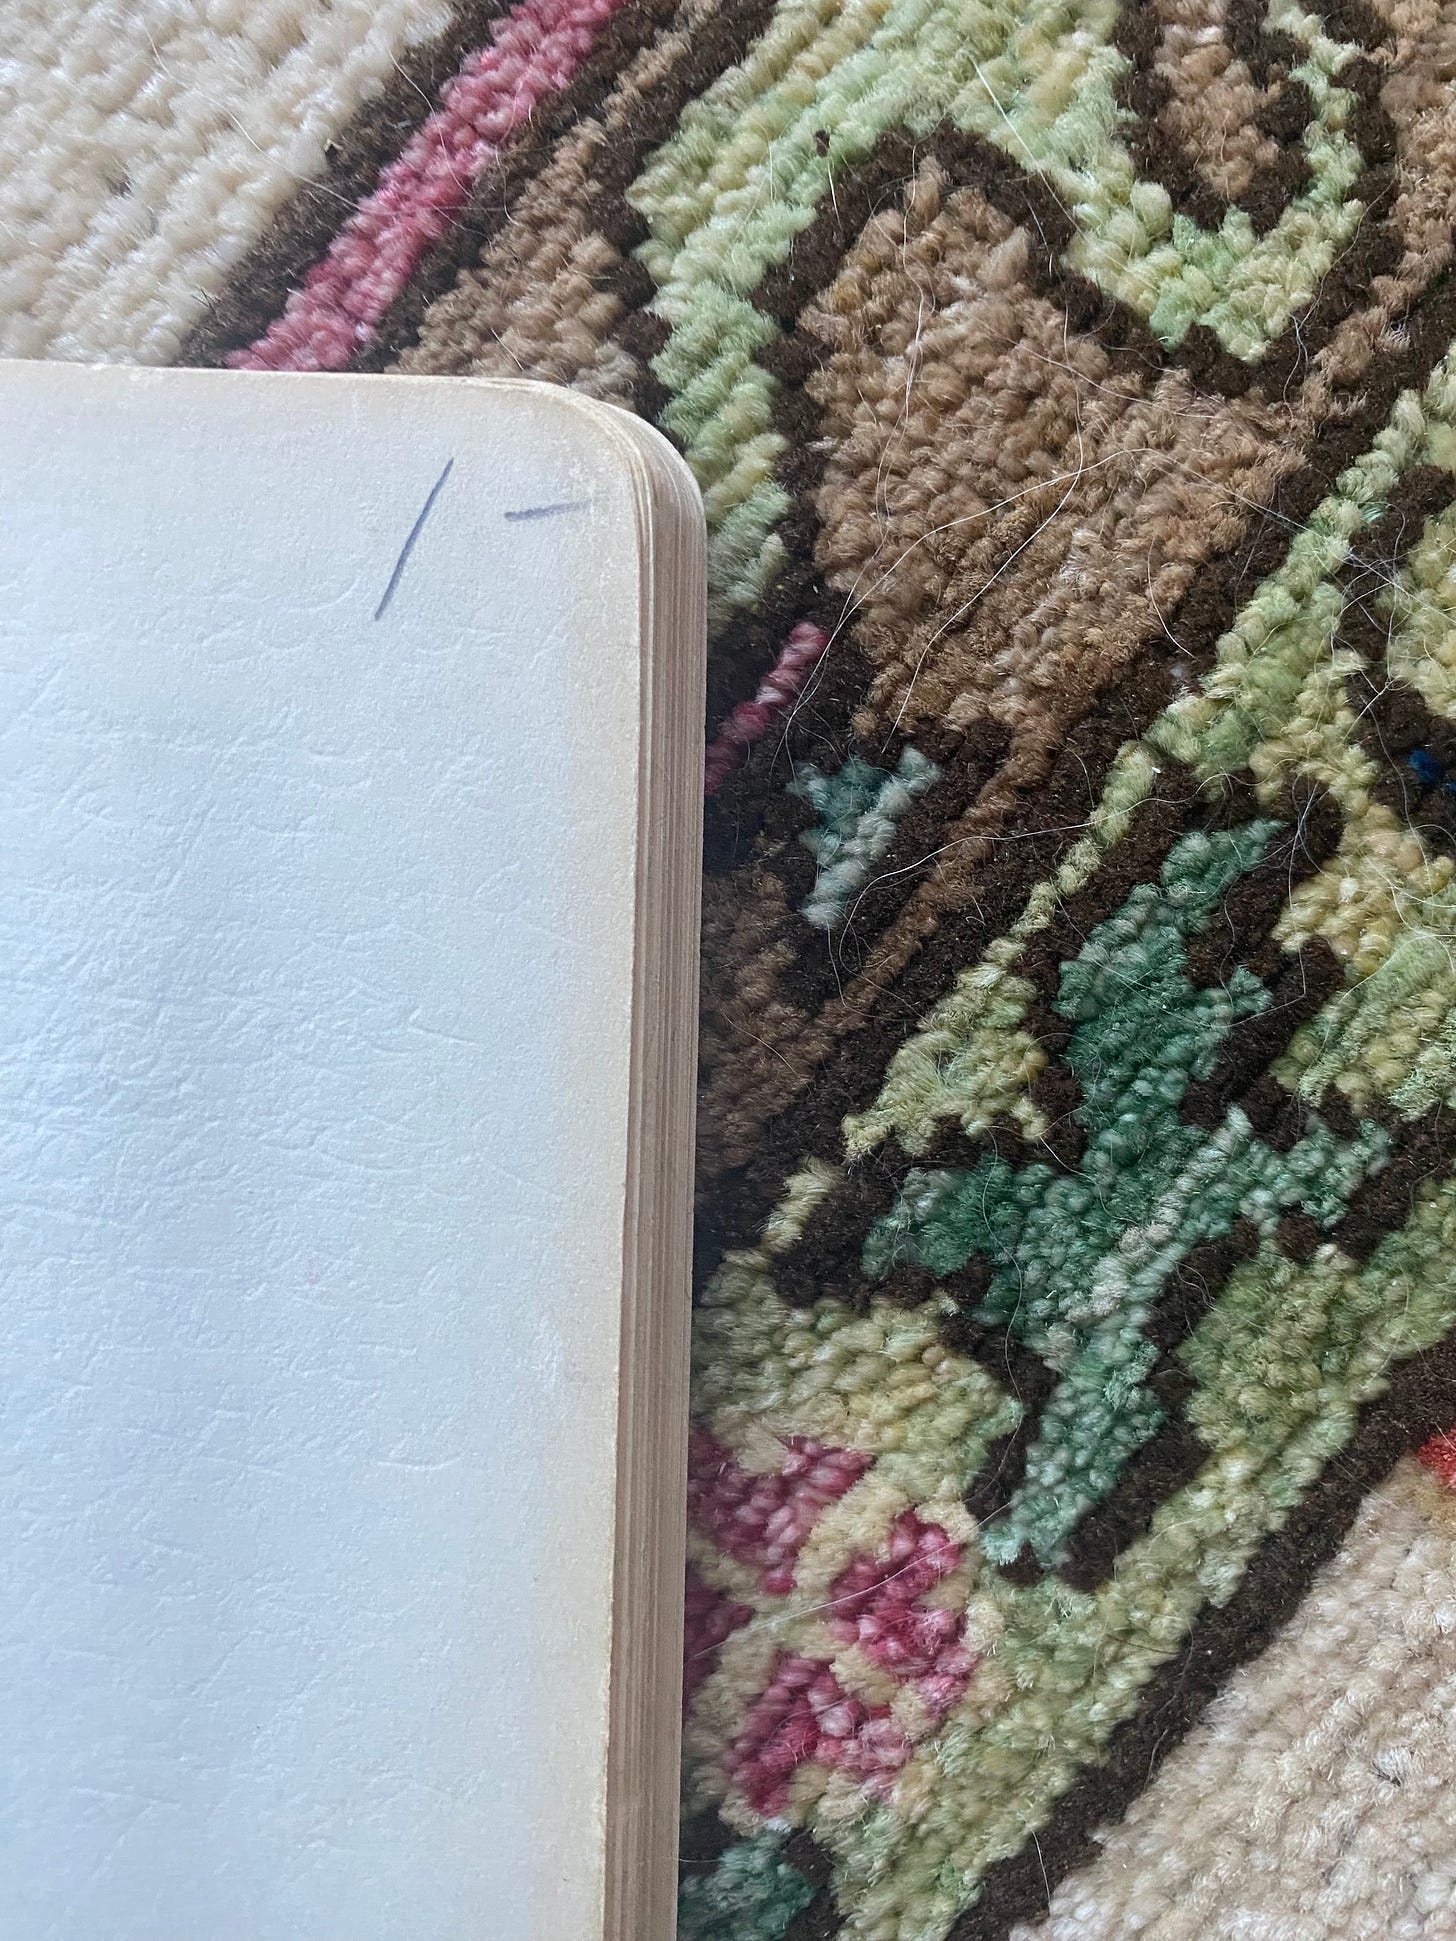 Photo of the inside of an old composition book with the price $1.00 written in pencil in the top right corner